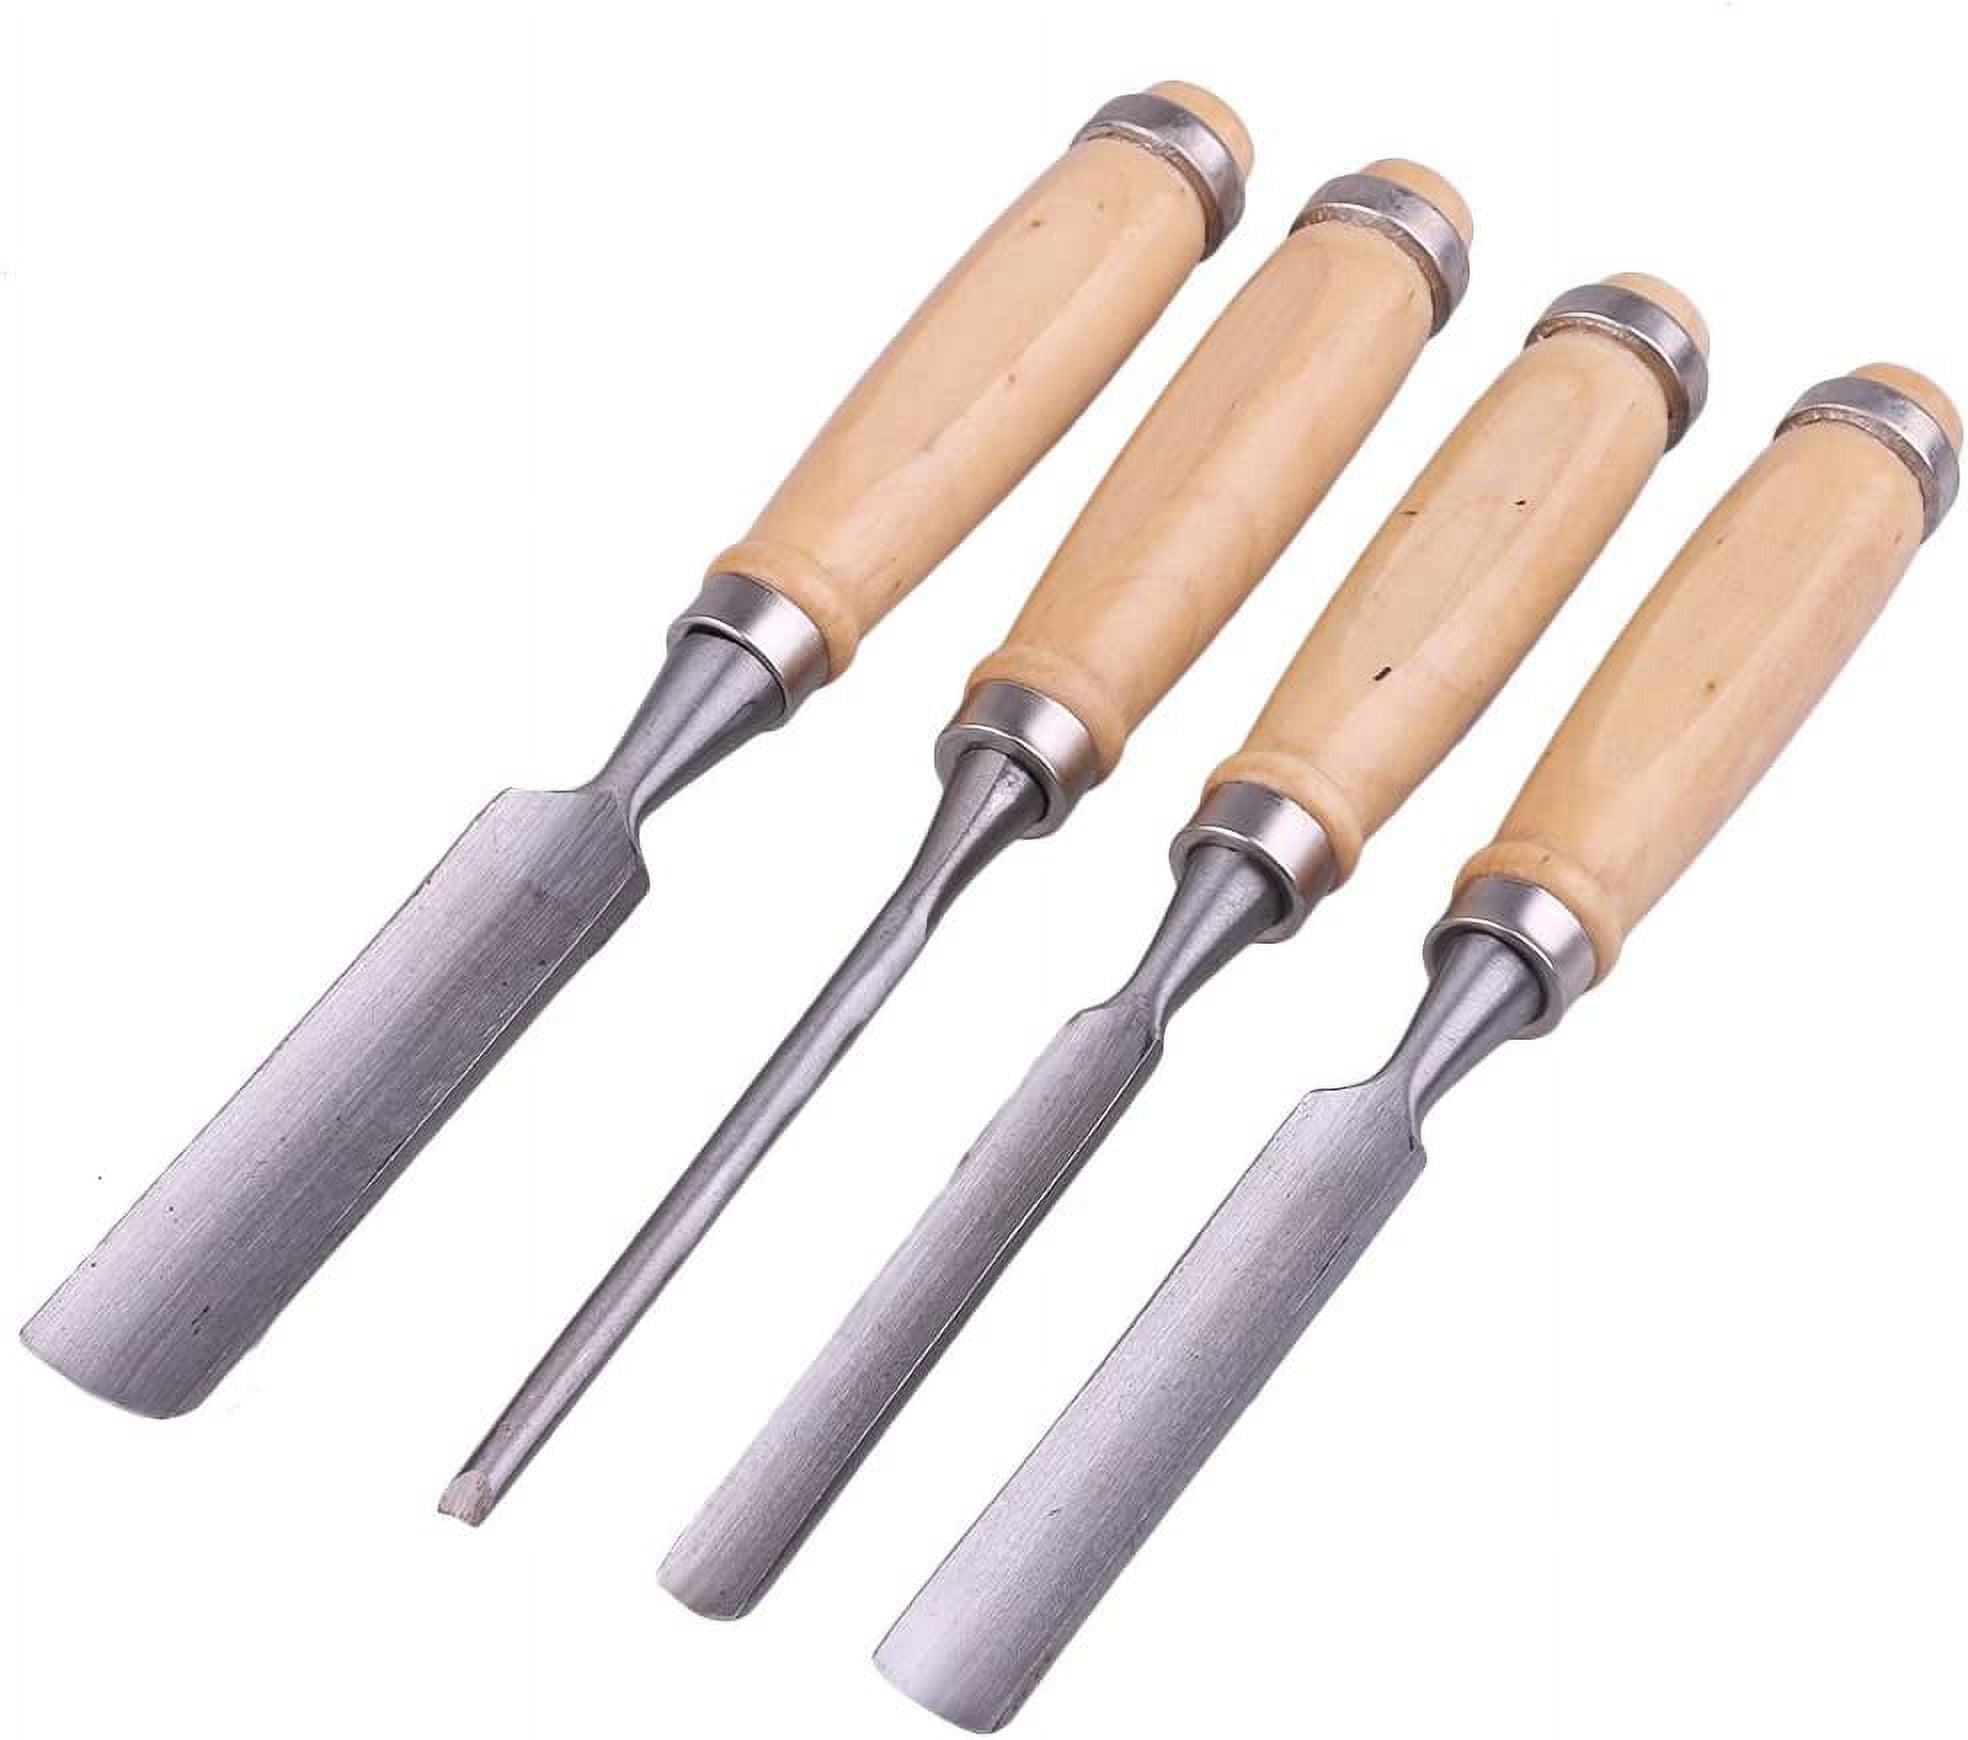  6Pcs Wood Carving Chisel Kit, DIY Sculpting Tools Professional  Sharp Hand Gouges Woodworking Knife Woodcarving Set Gift for Professional  Beginners Hobbyists Artistic Father Day Carpenter DIY Sculpture : Arts,  Crafts 